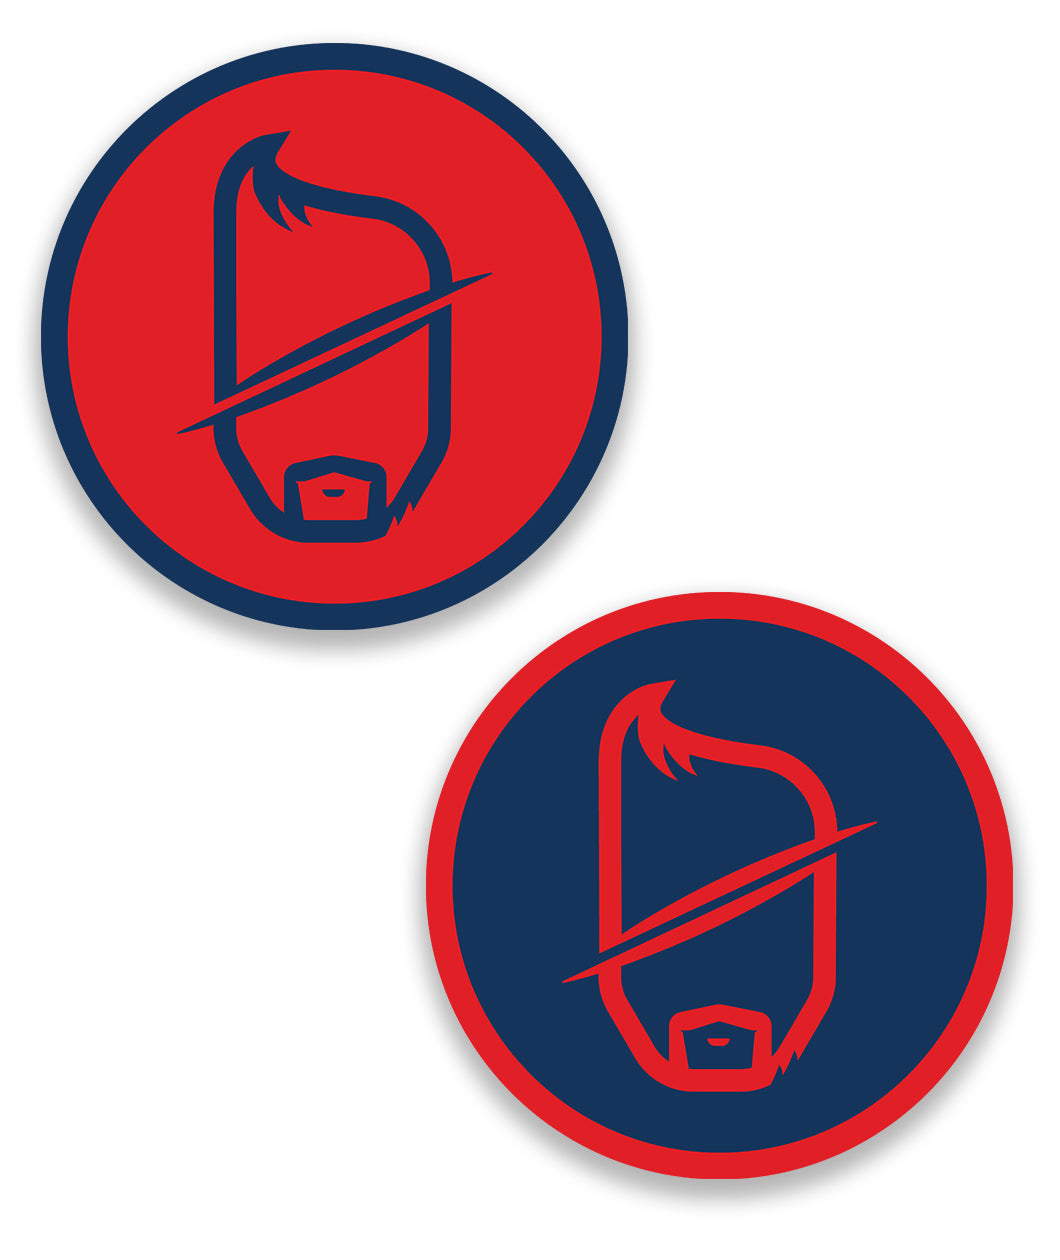 Pair of circle 2 inch stickers with a featureless male face with a goatee and a slash through the middle, surrounded by a circle. Red logo on navy sticker and navy logo on red sticker.